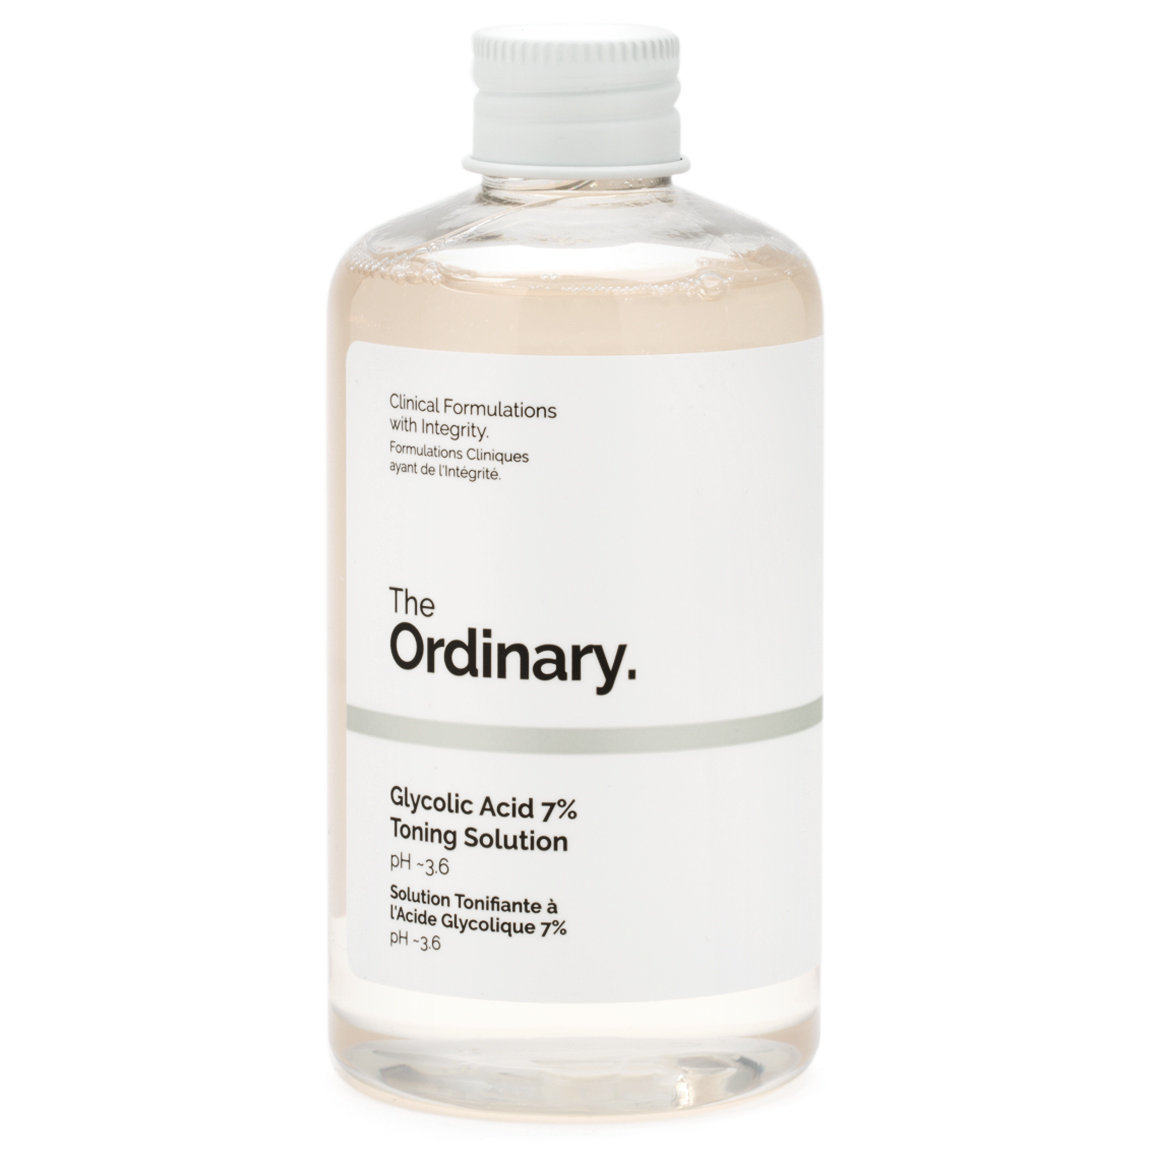 The Ordinary. Glycolic Acid 7% Toning Solution alternative view 1 - product swatch.